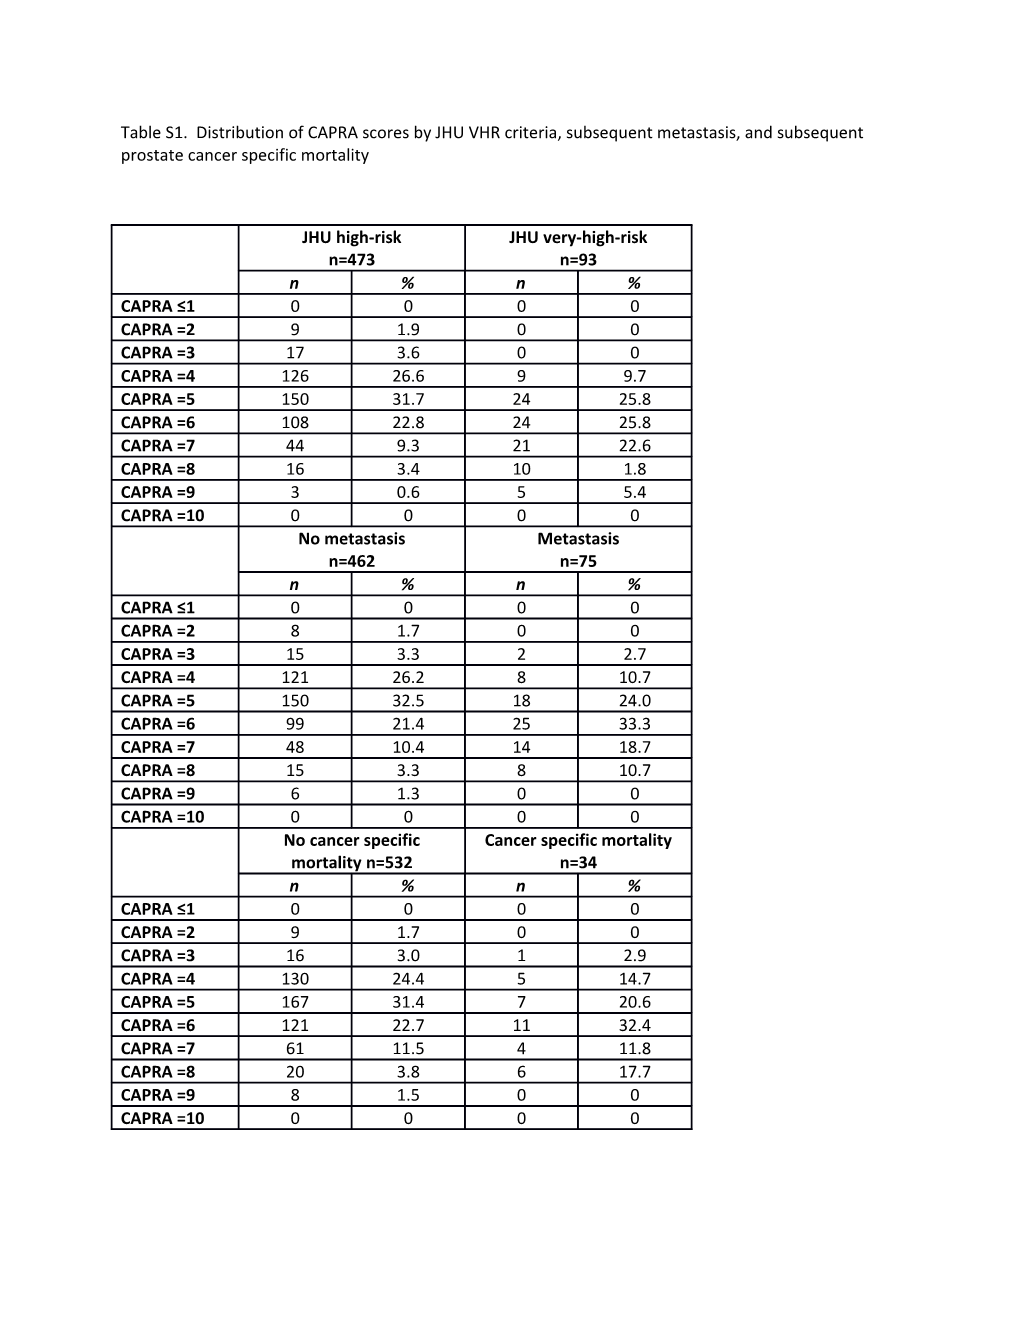 Table S1. Distribution of CAPRA Scores by JHU VHR Criteria, Subsequent Metastasis, And